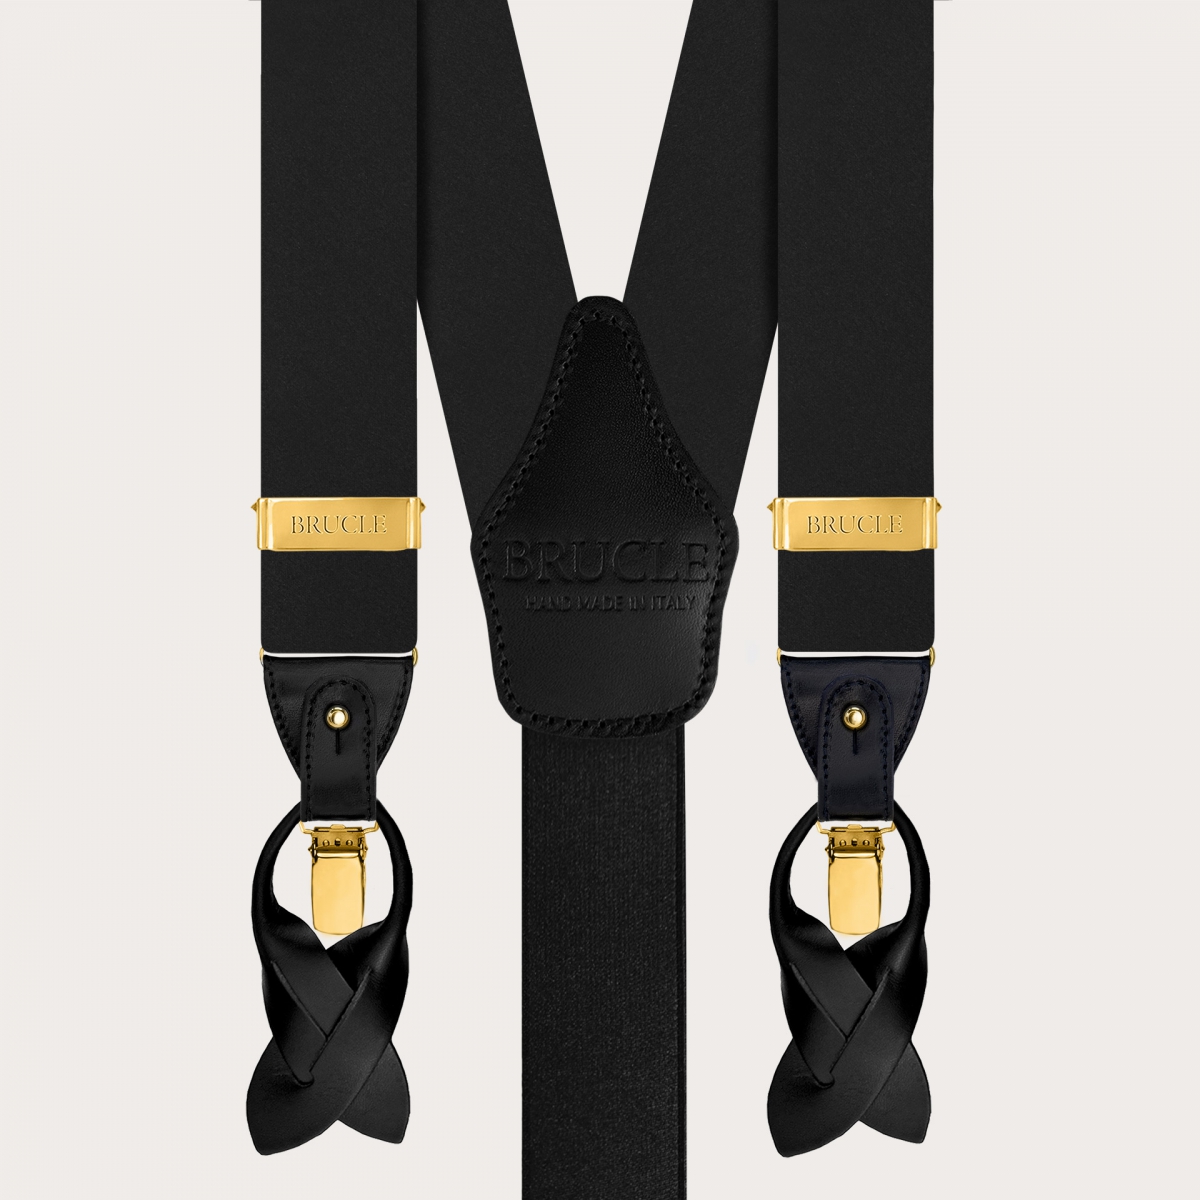 Coordinated set consisting of gold suspenders and black silk bow tie